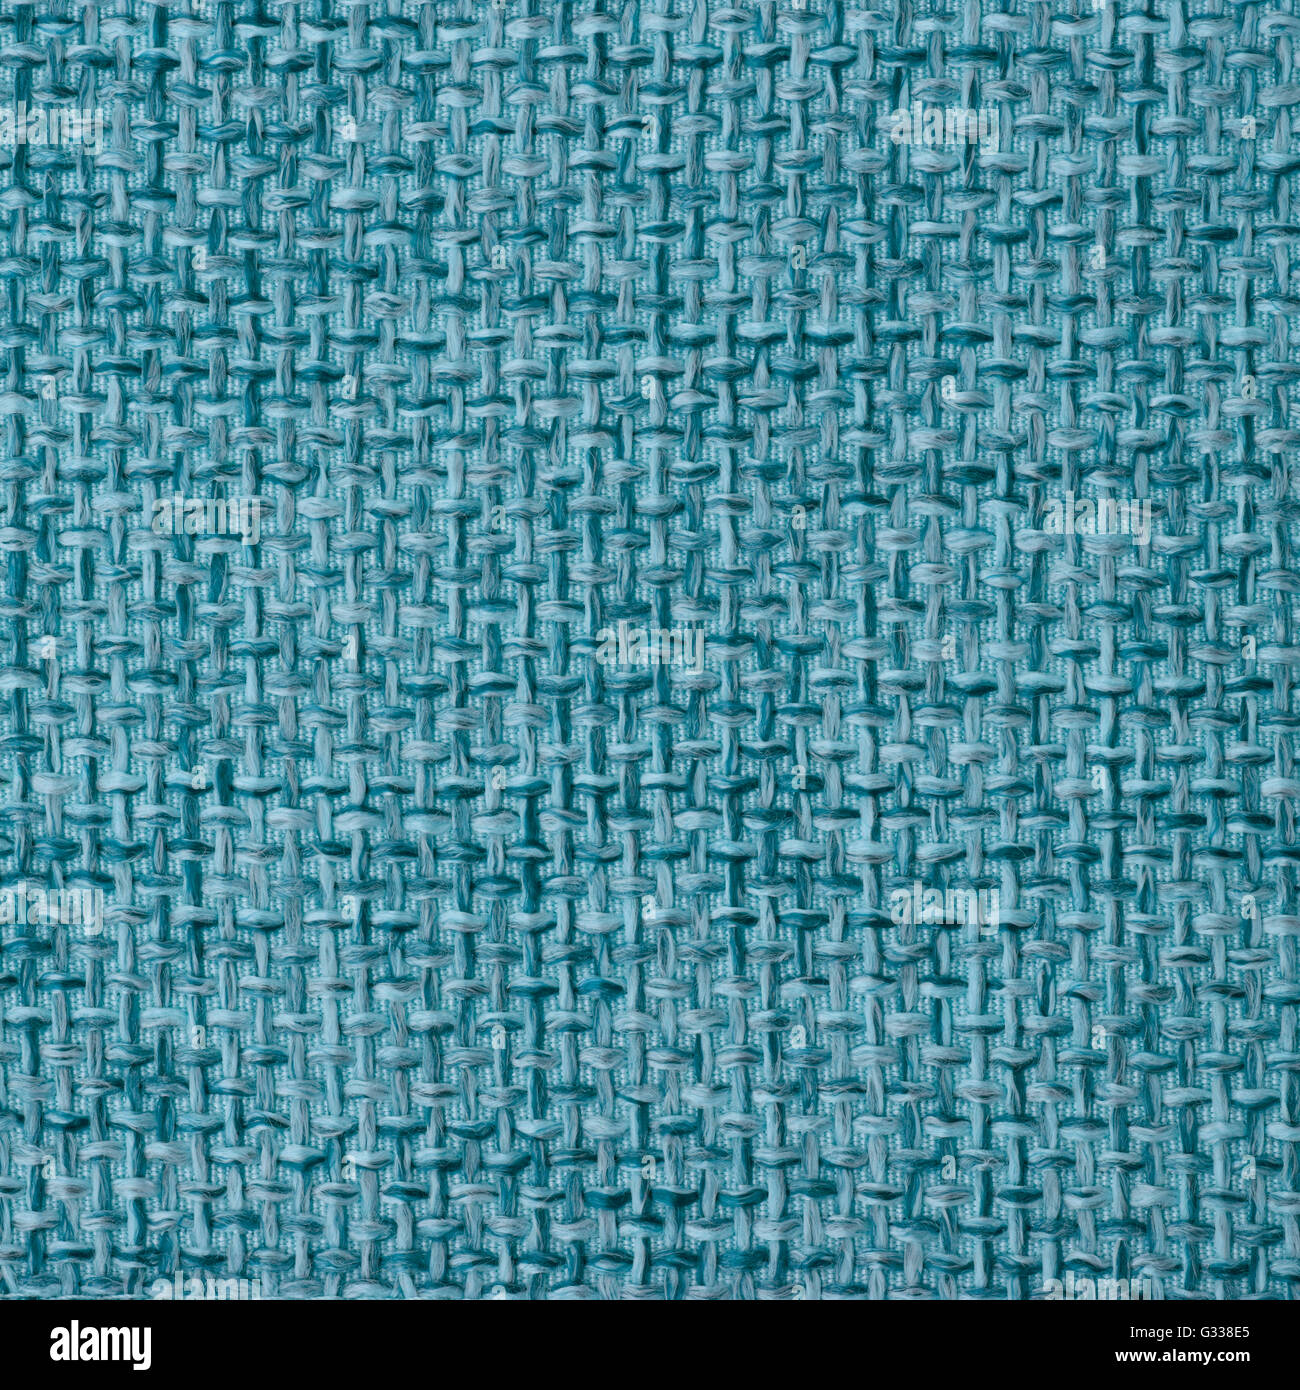 Aqua turquoise blue fabric texture. Close up, top view. Stock Photo